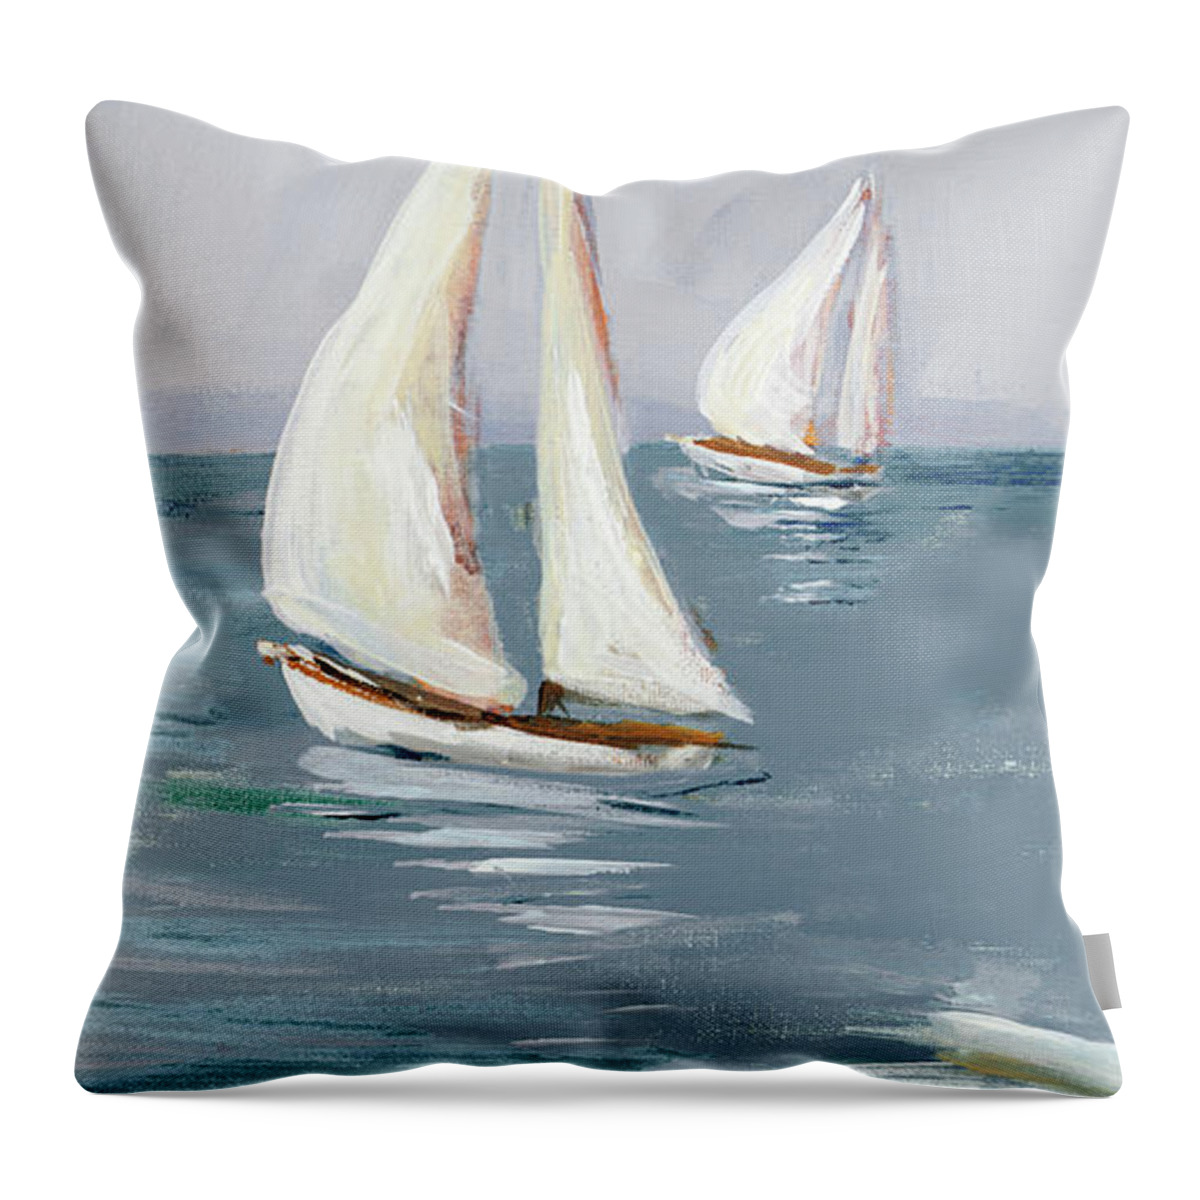 Coast Throw Pillow featuring the painting Coast Sailing I by South Social D